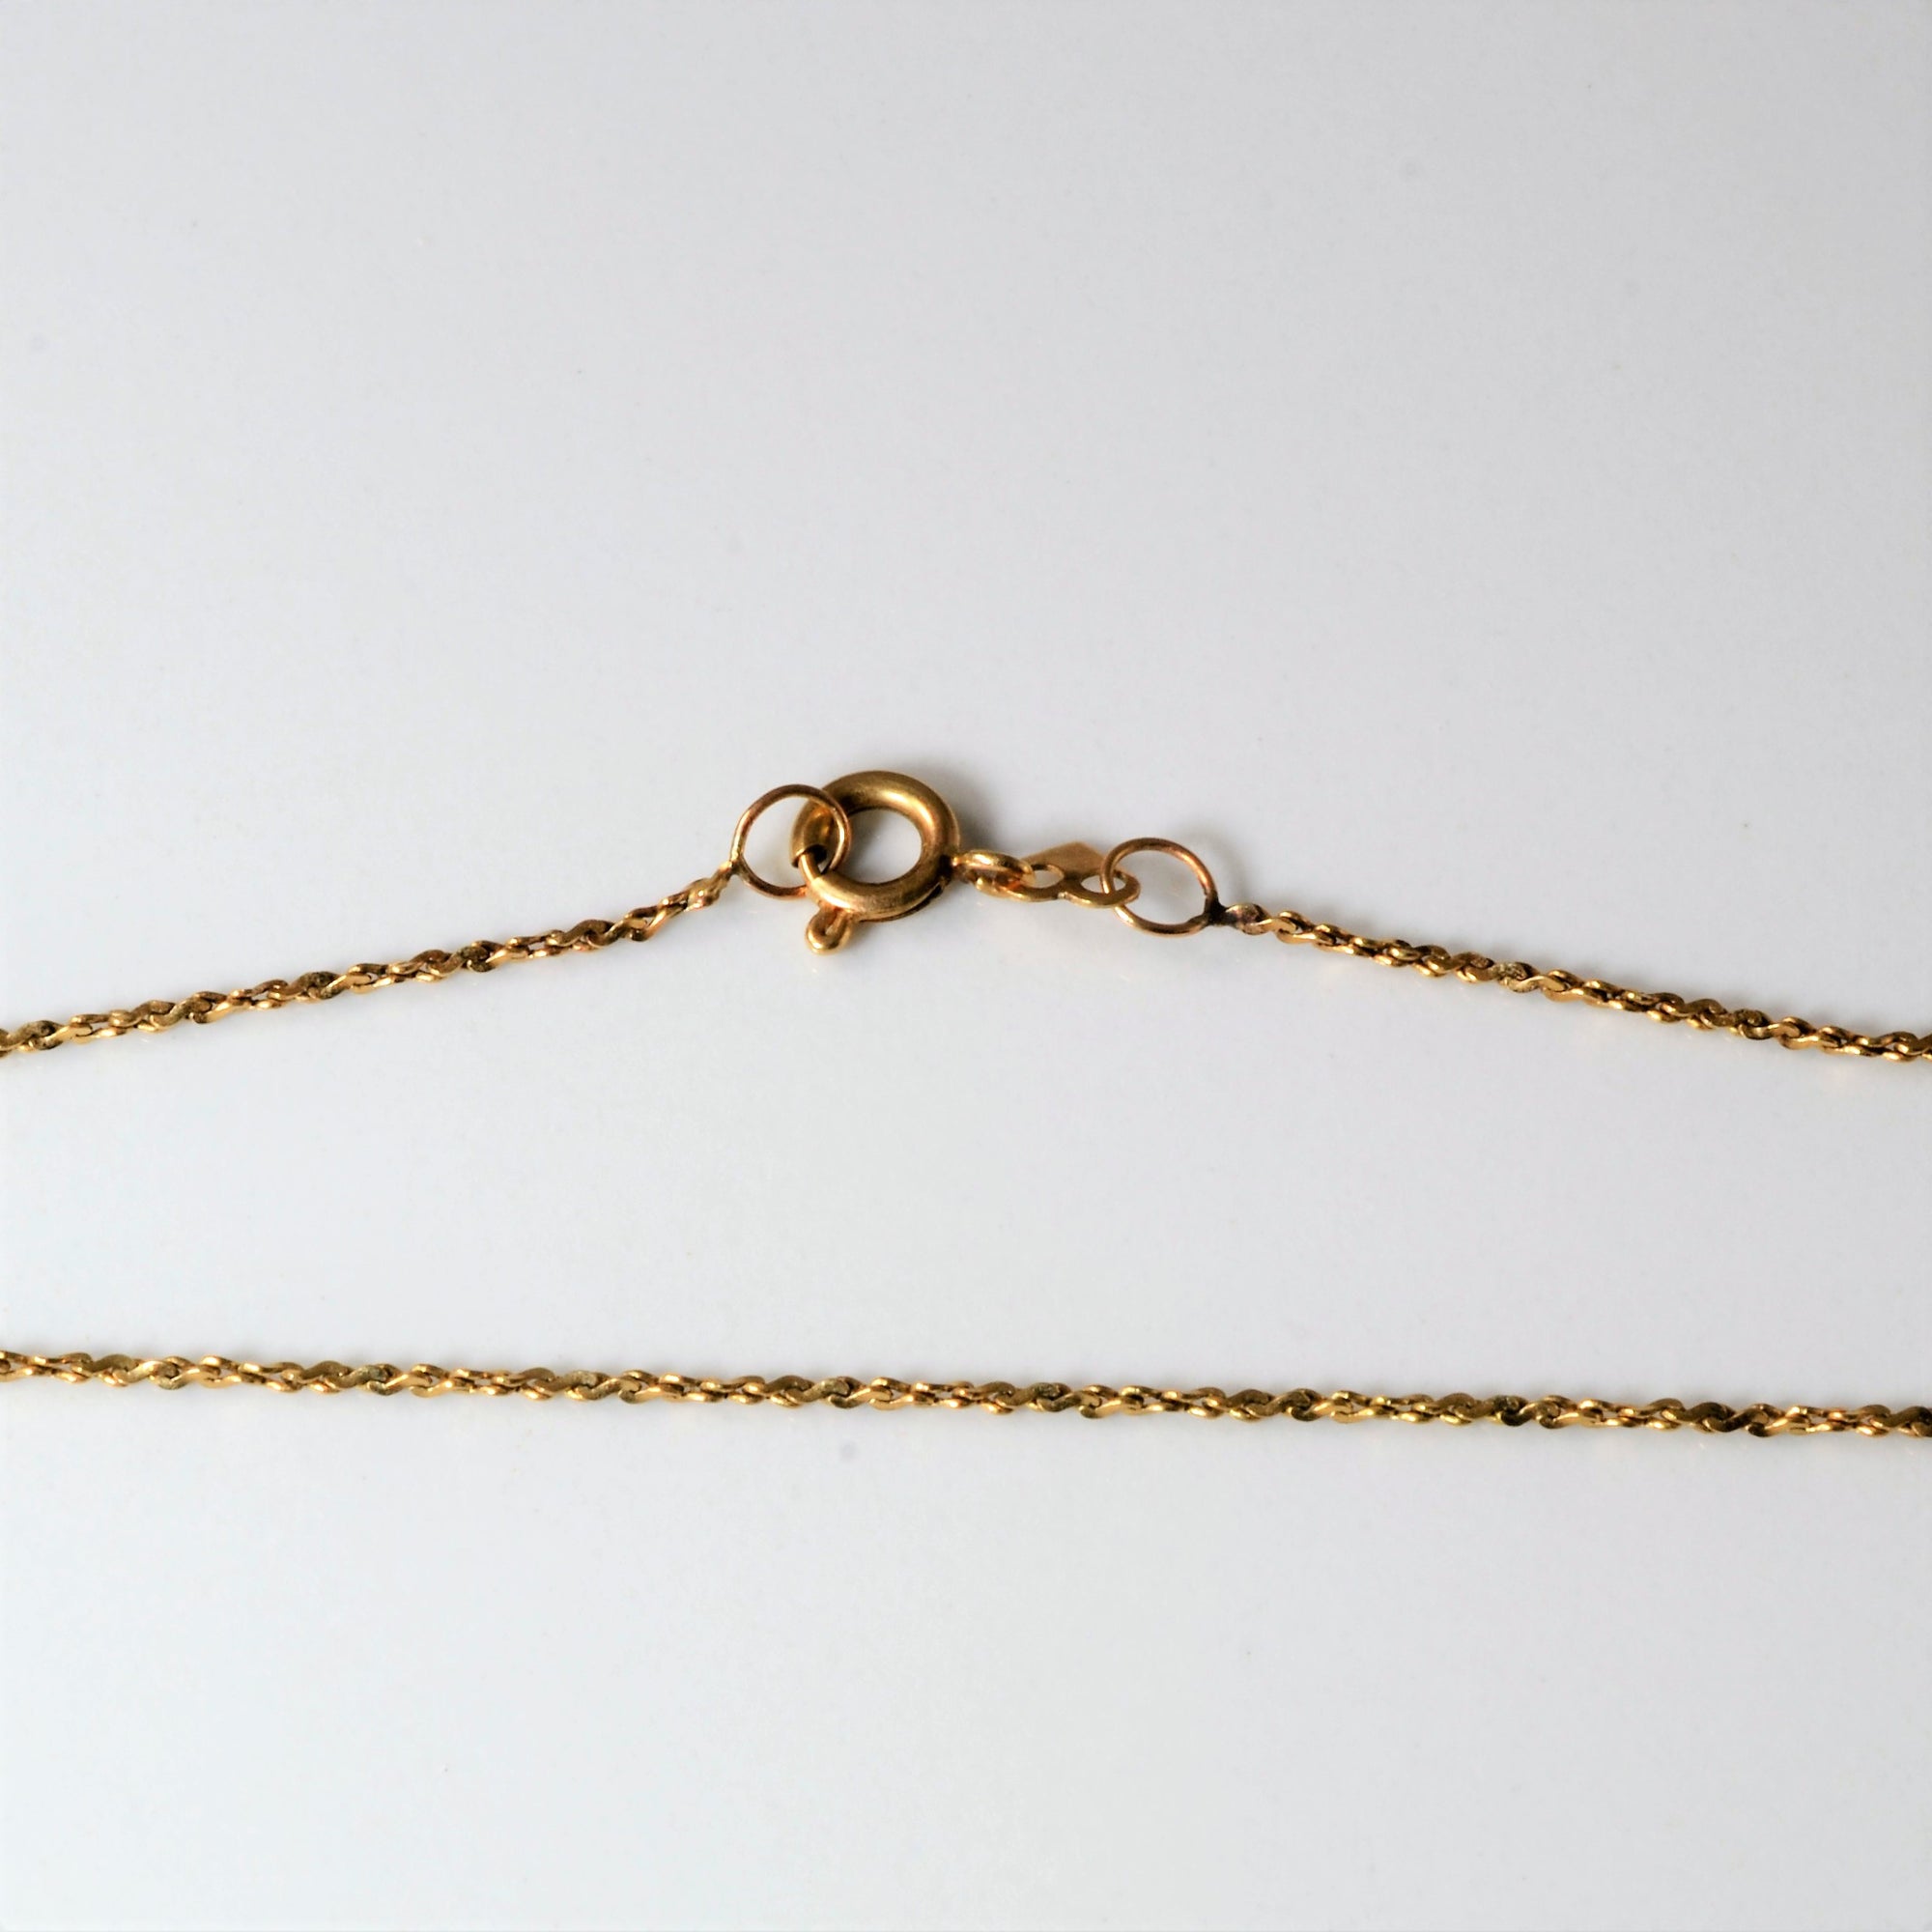 10k Yellow Gold Twisted Serpentine Chain | 20